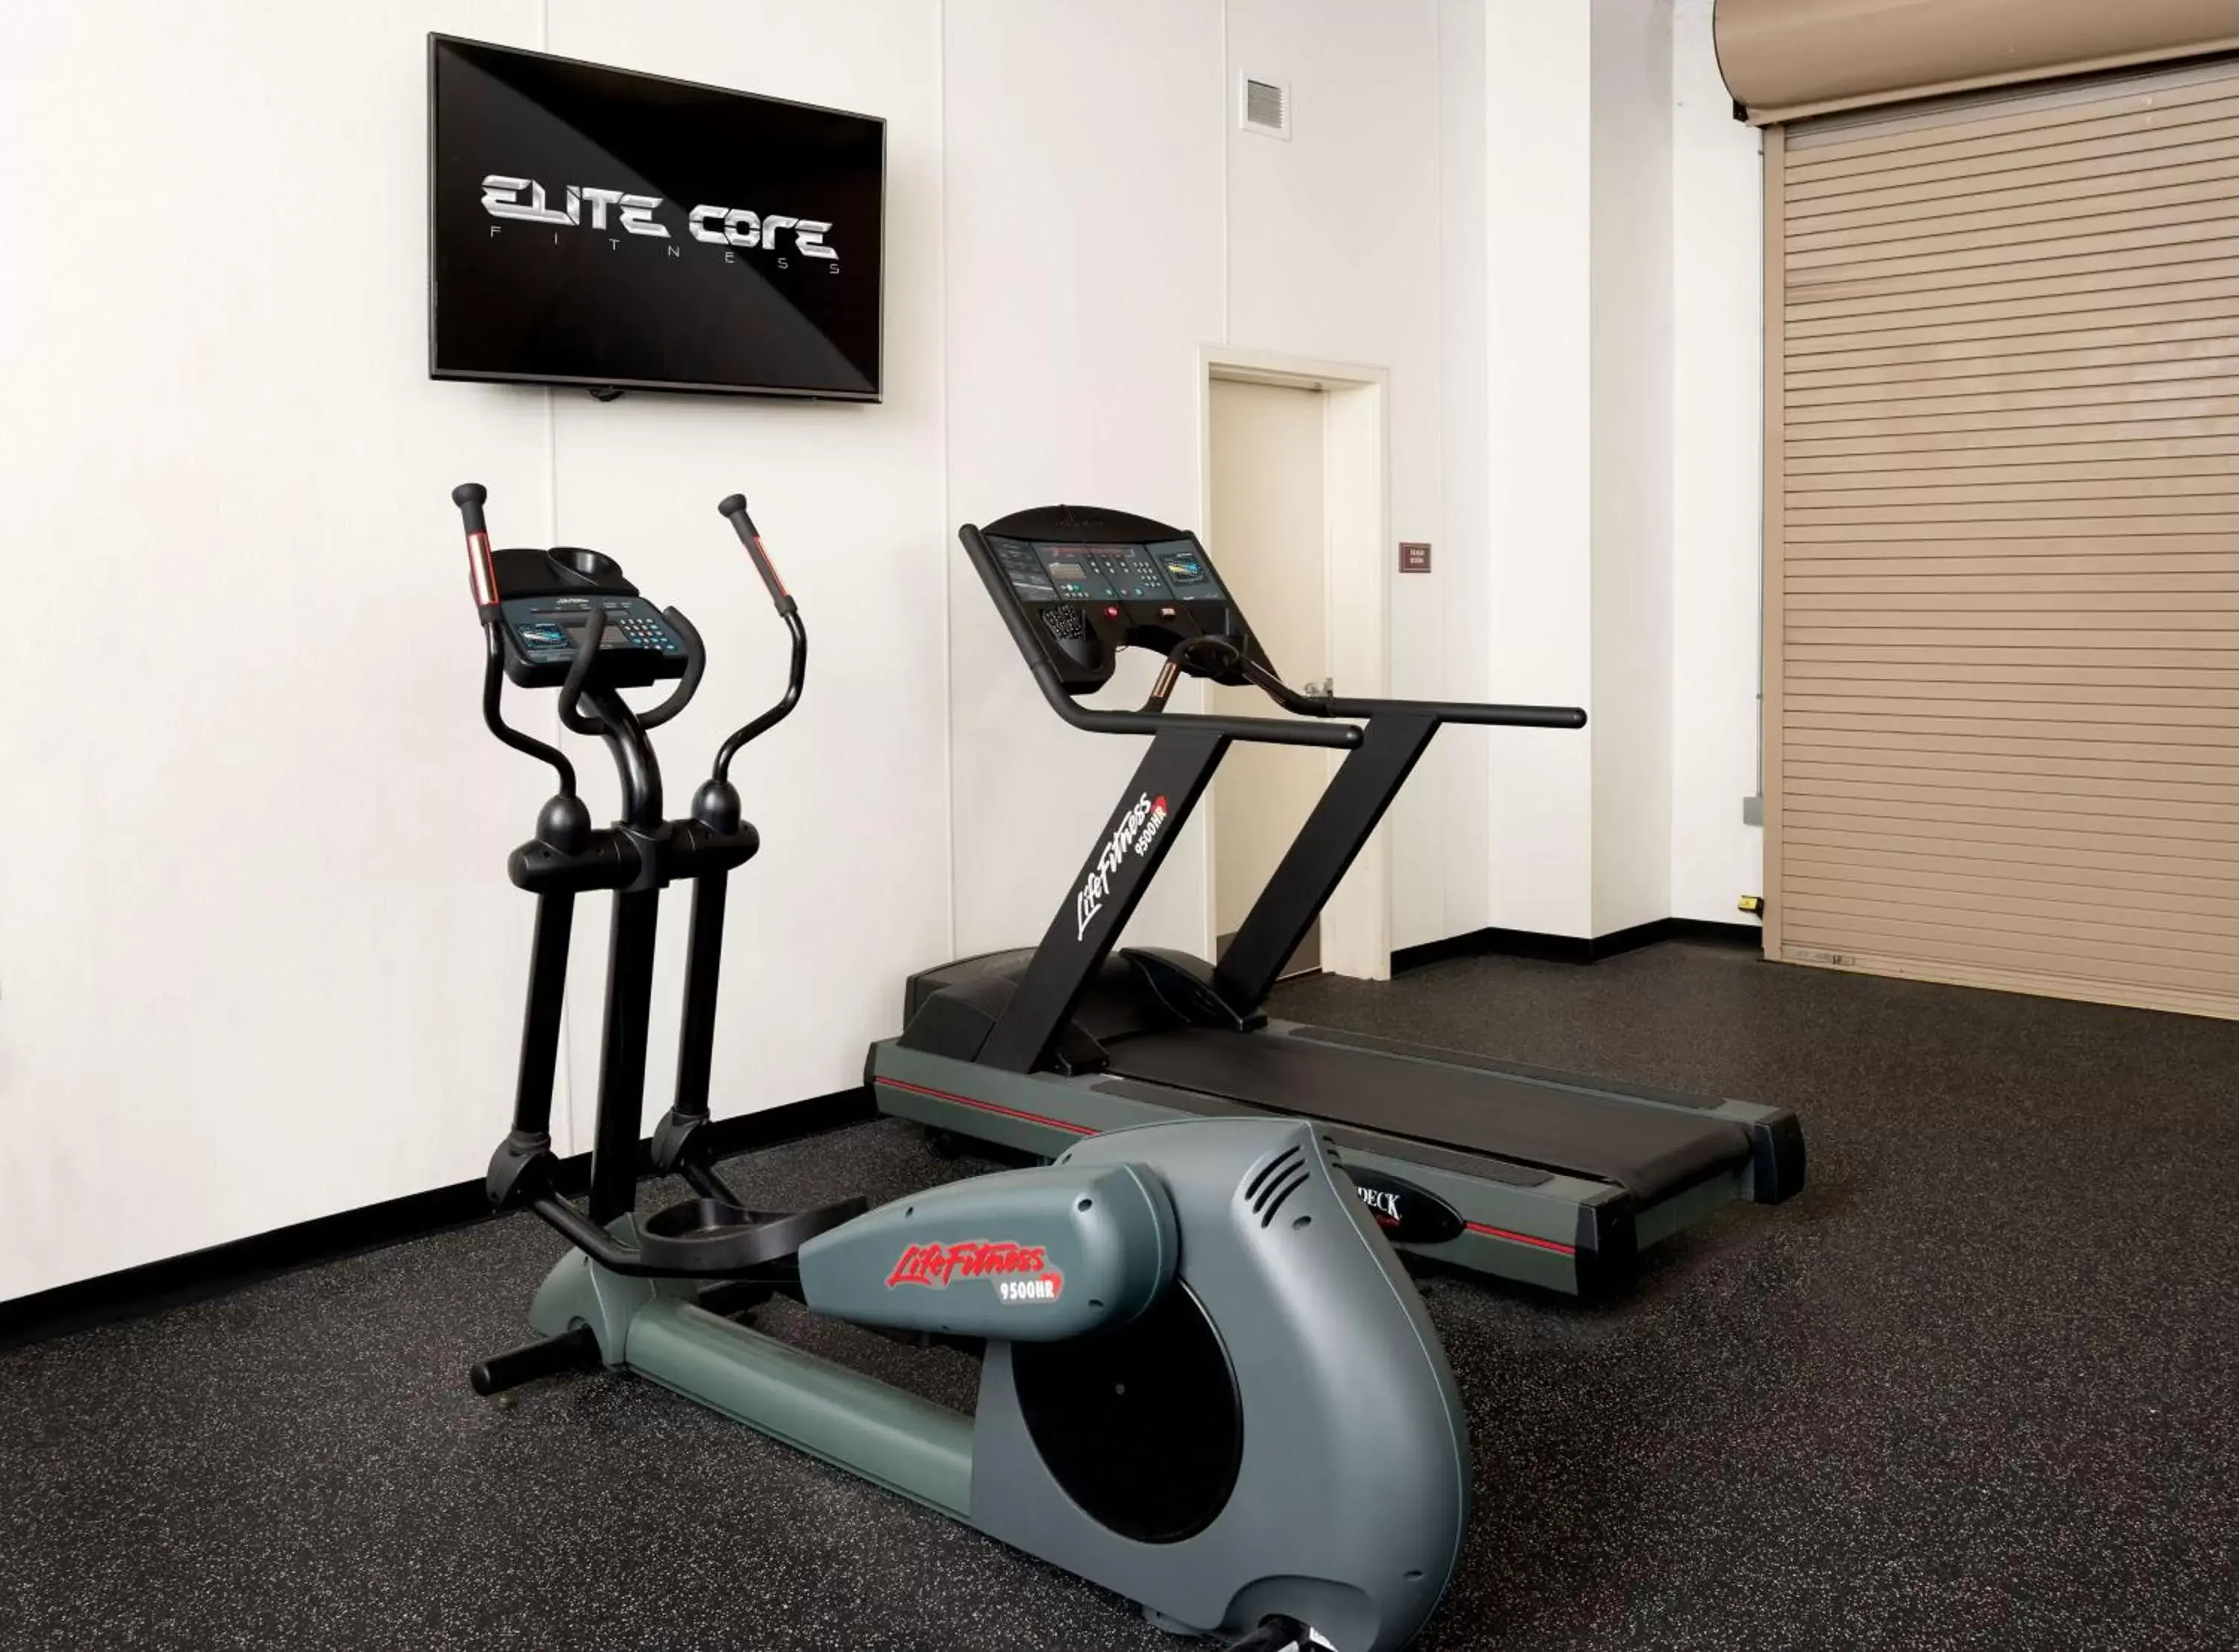 Fitness centre/facilities in Best Western Plus - King of Prussia